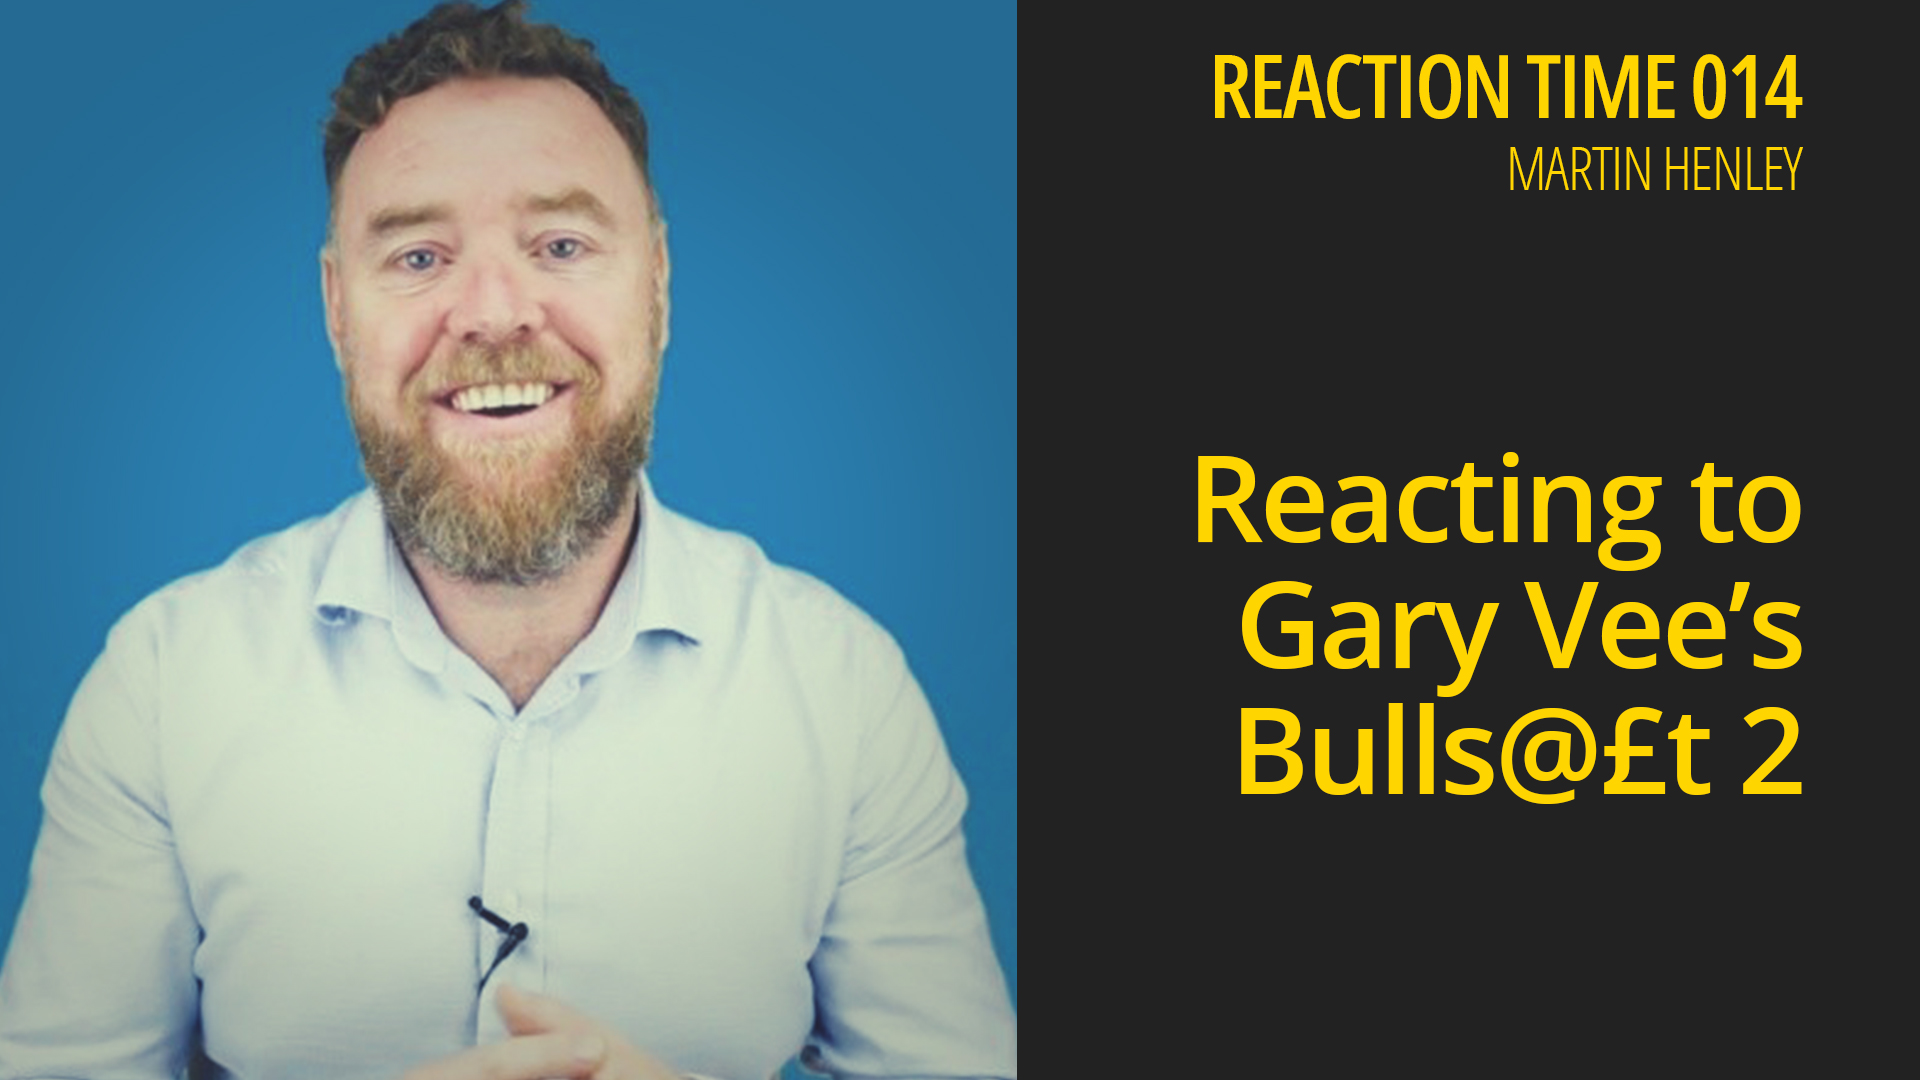 Reacting to Gary Vee’s Bulls@£t 2 – Reaction Time 014